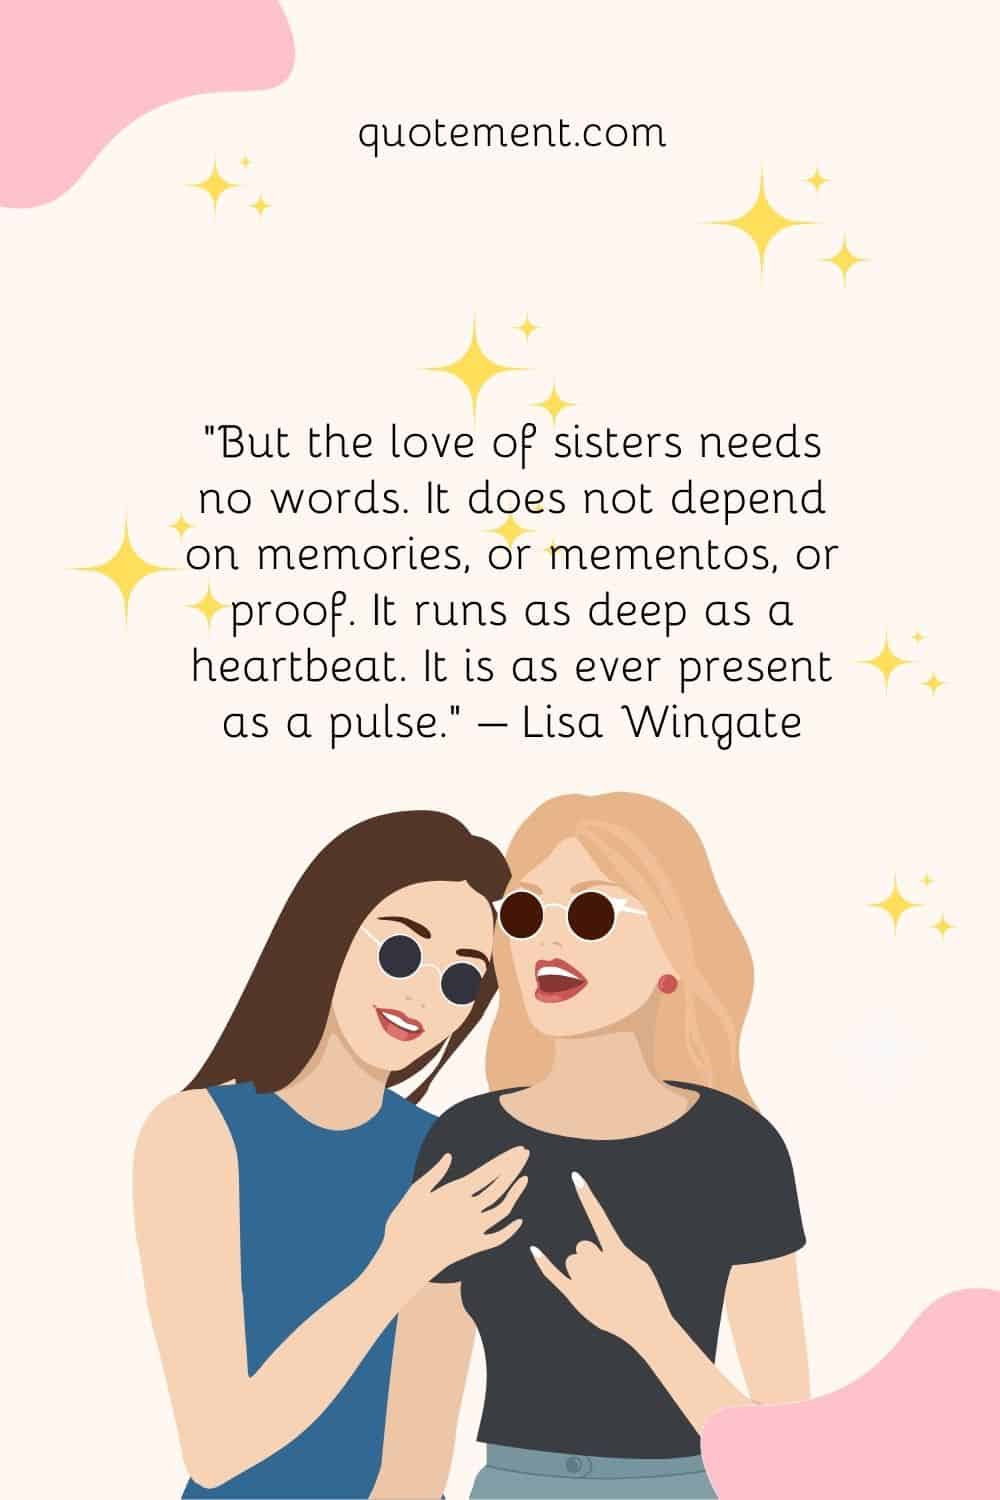 “But the love of sisters needs no words. It does not depend on memories, or mementos, or proof